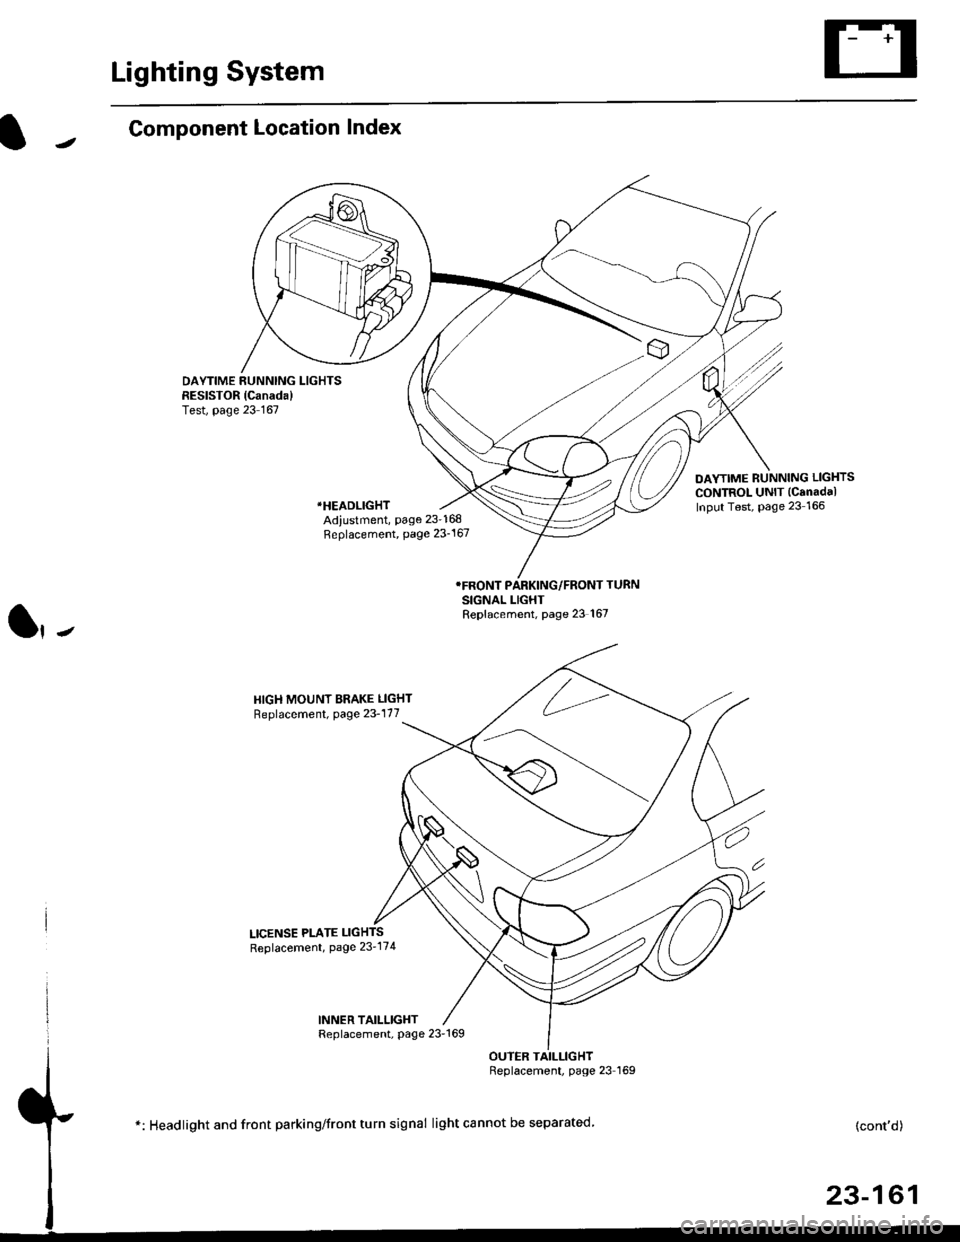 HONDA CIVIC 1996 6.G Workshop Manual Lighting System
Component Location Index
DAYTIME RUNNING LIGHTSRESISTOR {Canada)Test, page 23 167
DAYTIME RUNNING LIGHTS
CONTROL UNIT (Canadal
Input Test, Page 23 166*HEADLIGHT
Adiustment, page 23-168